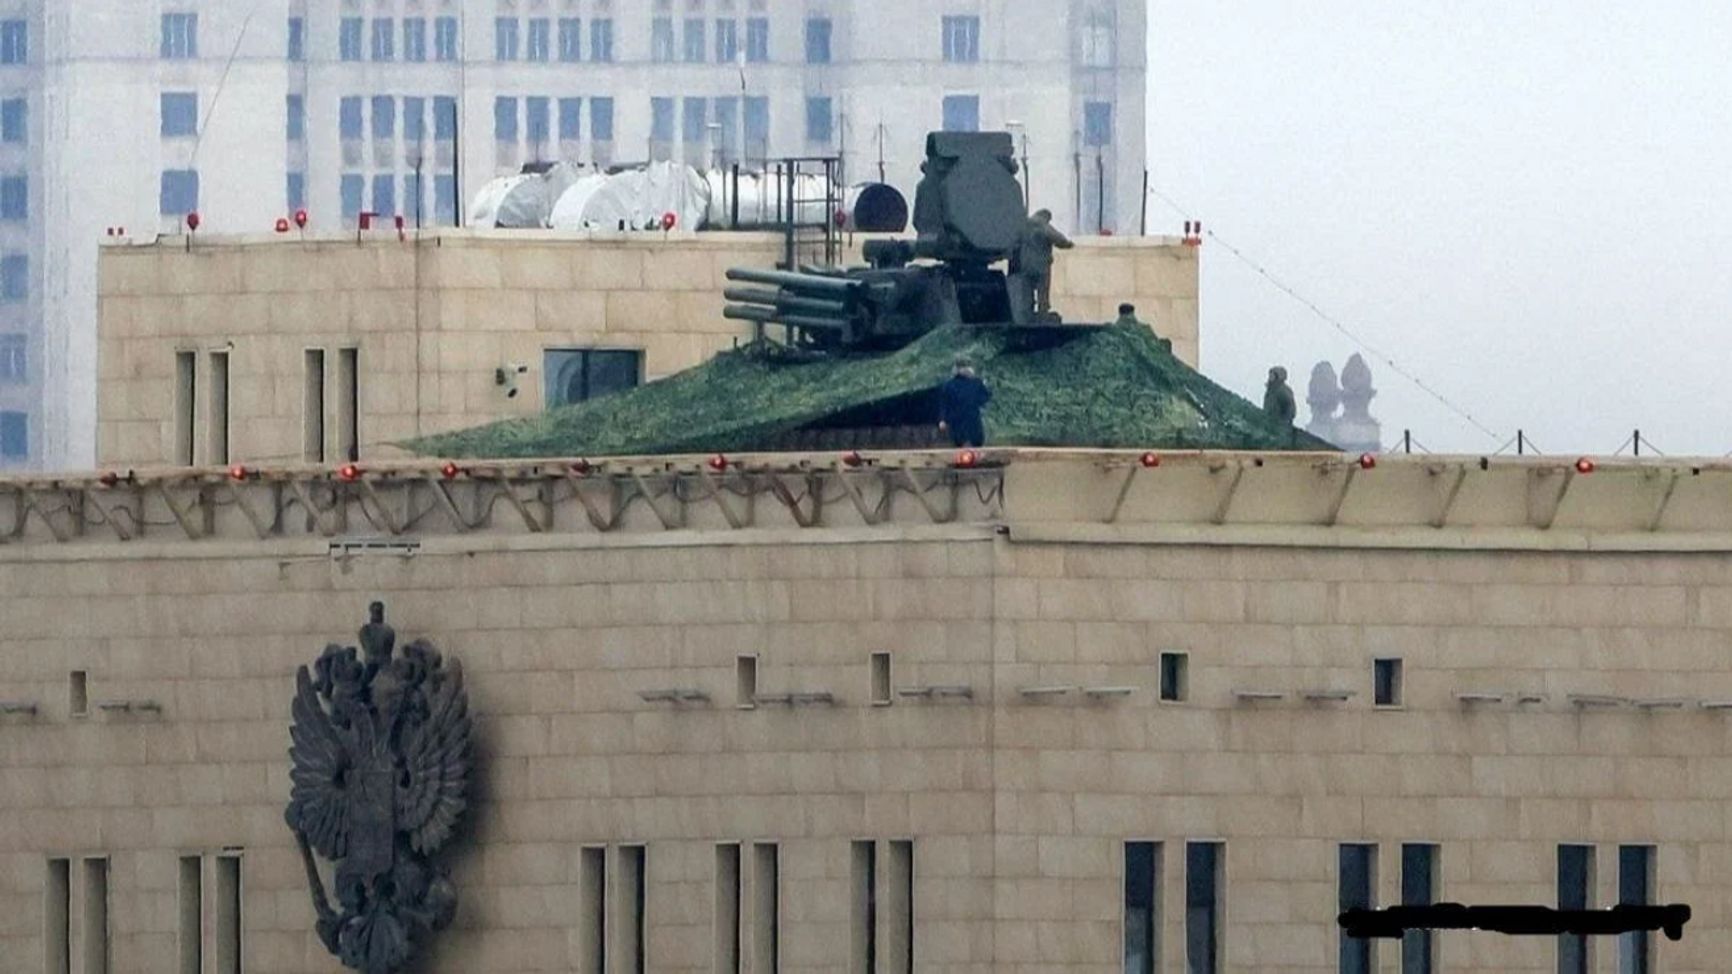 A Pantsir-S1 surface-to-air artillery system on the roof of the Ministry of Defense, Moscow